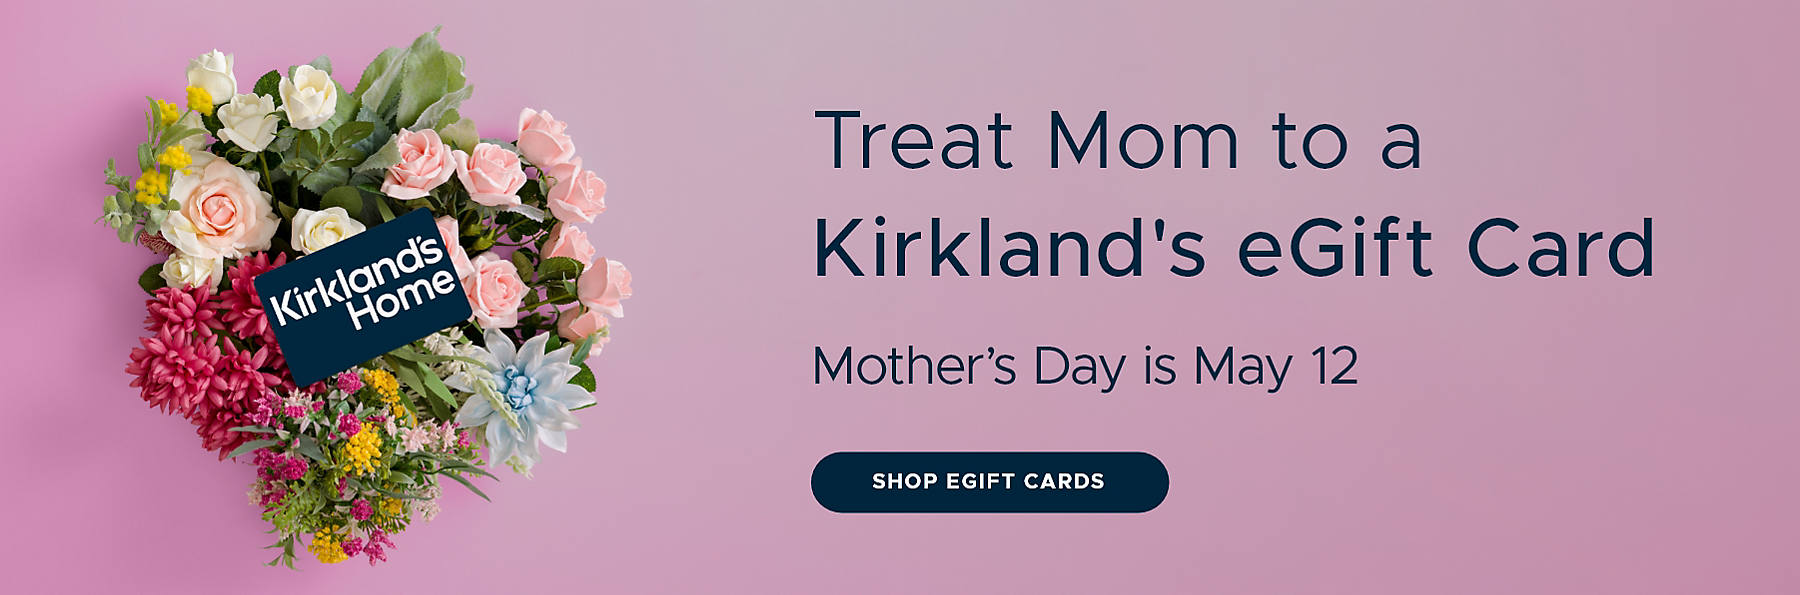 Treat Mom to a Kirkland's eGift Card Mother's Day is May 12 Shop eGift Cards